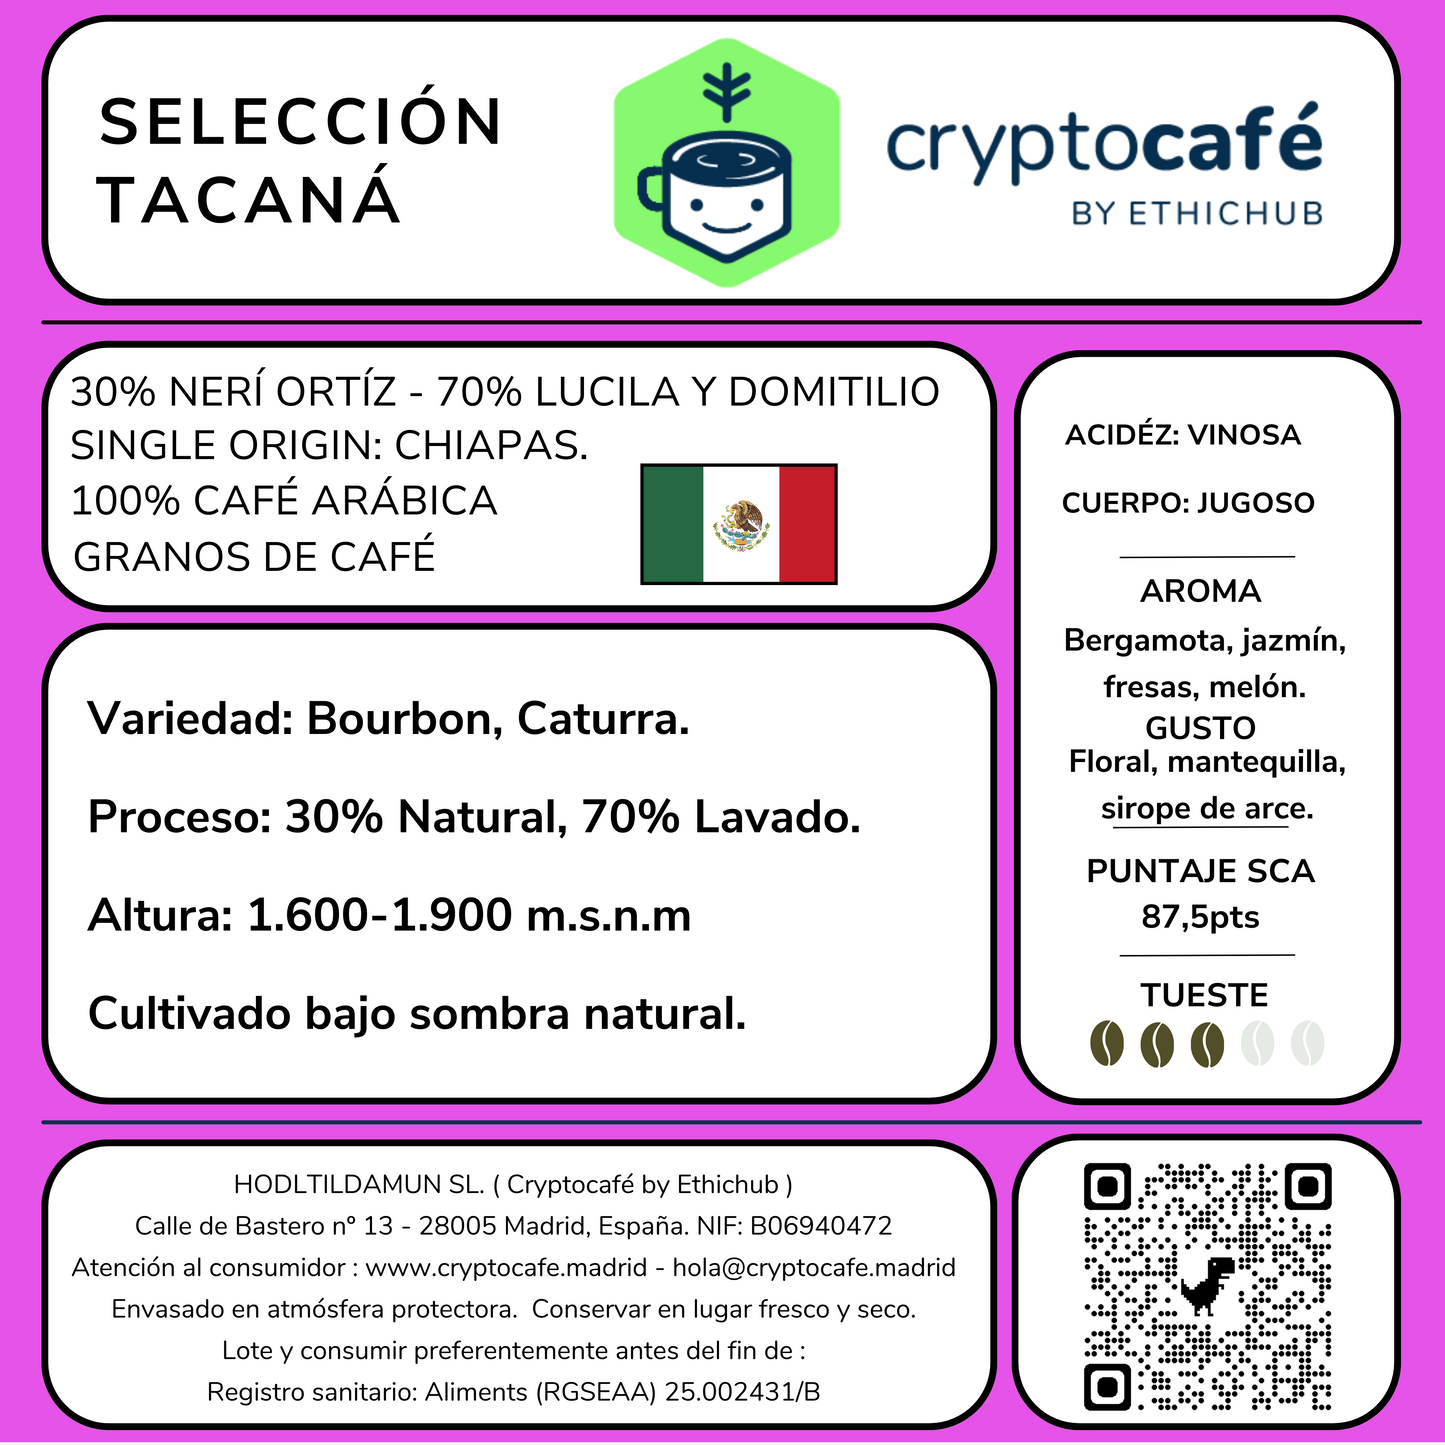 Specialty Coffee "TACANÁ SELECTION"